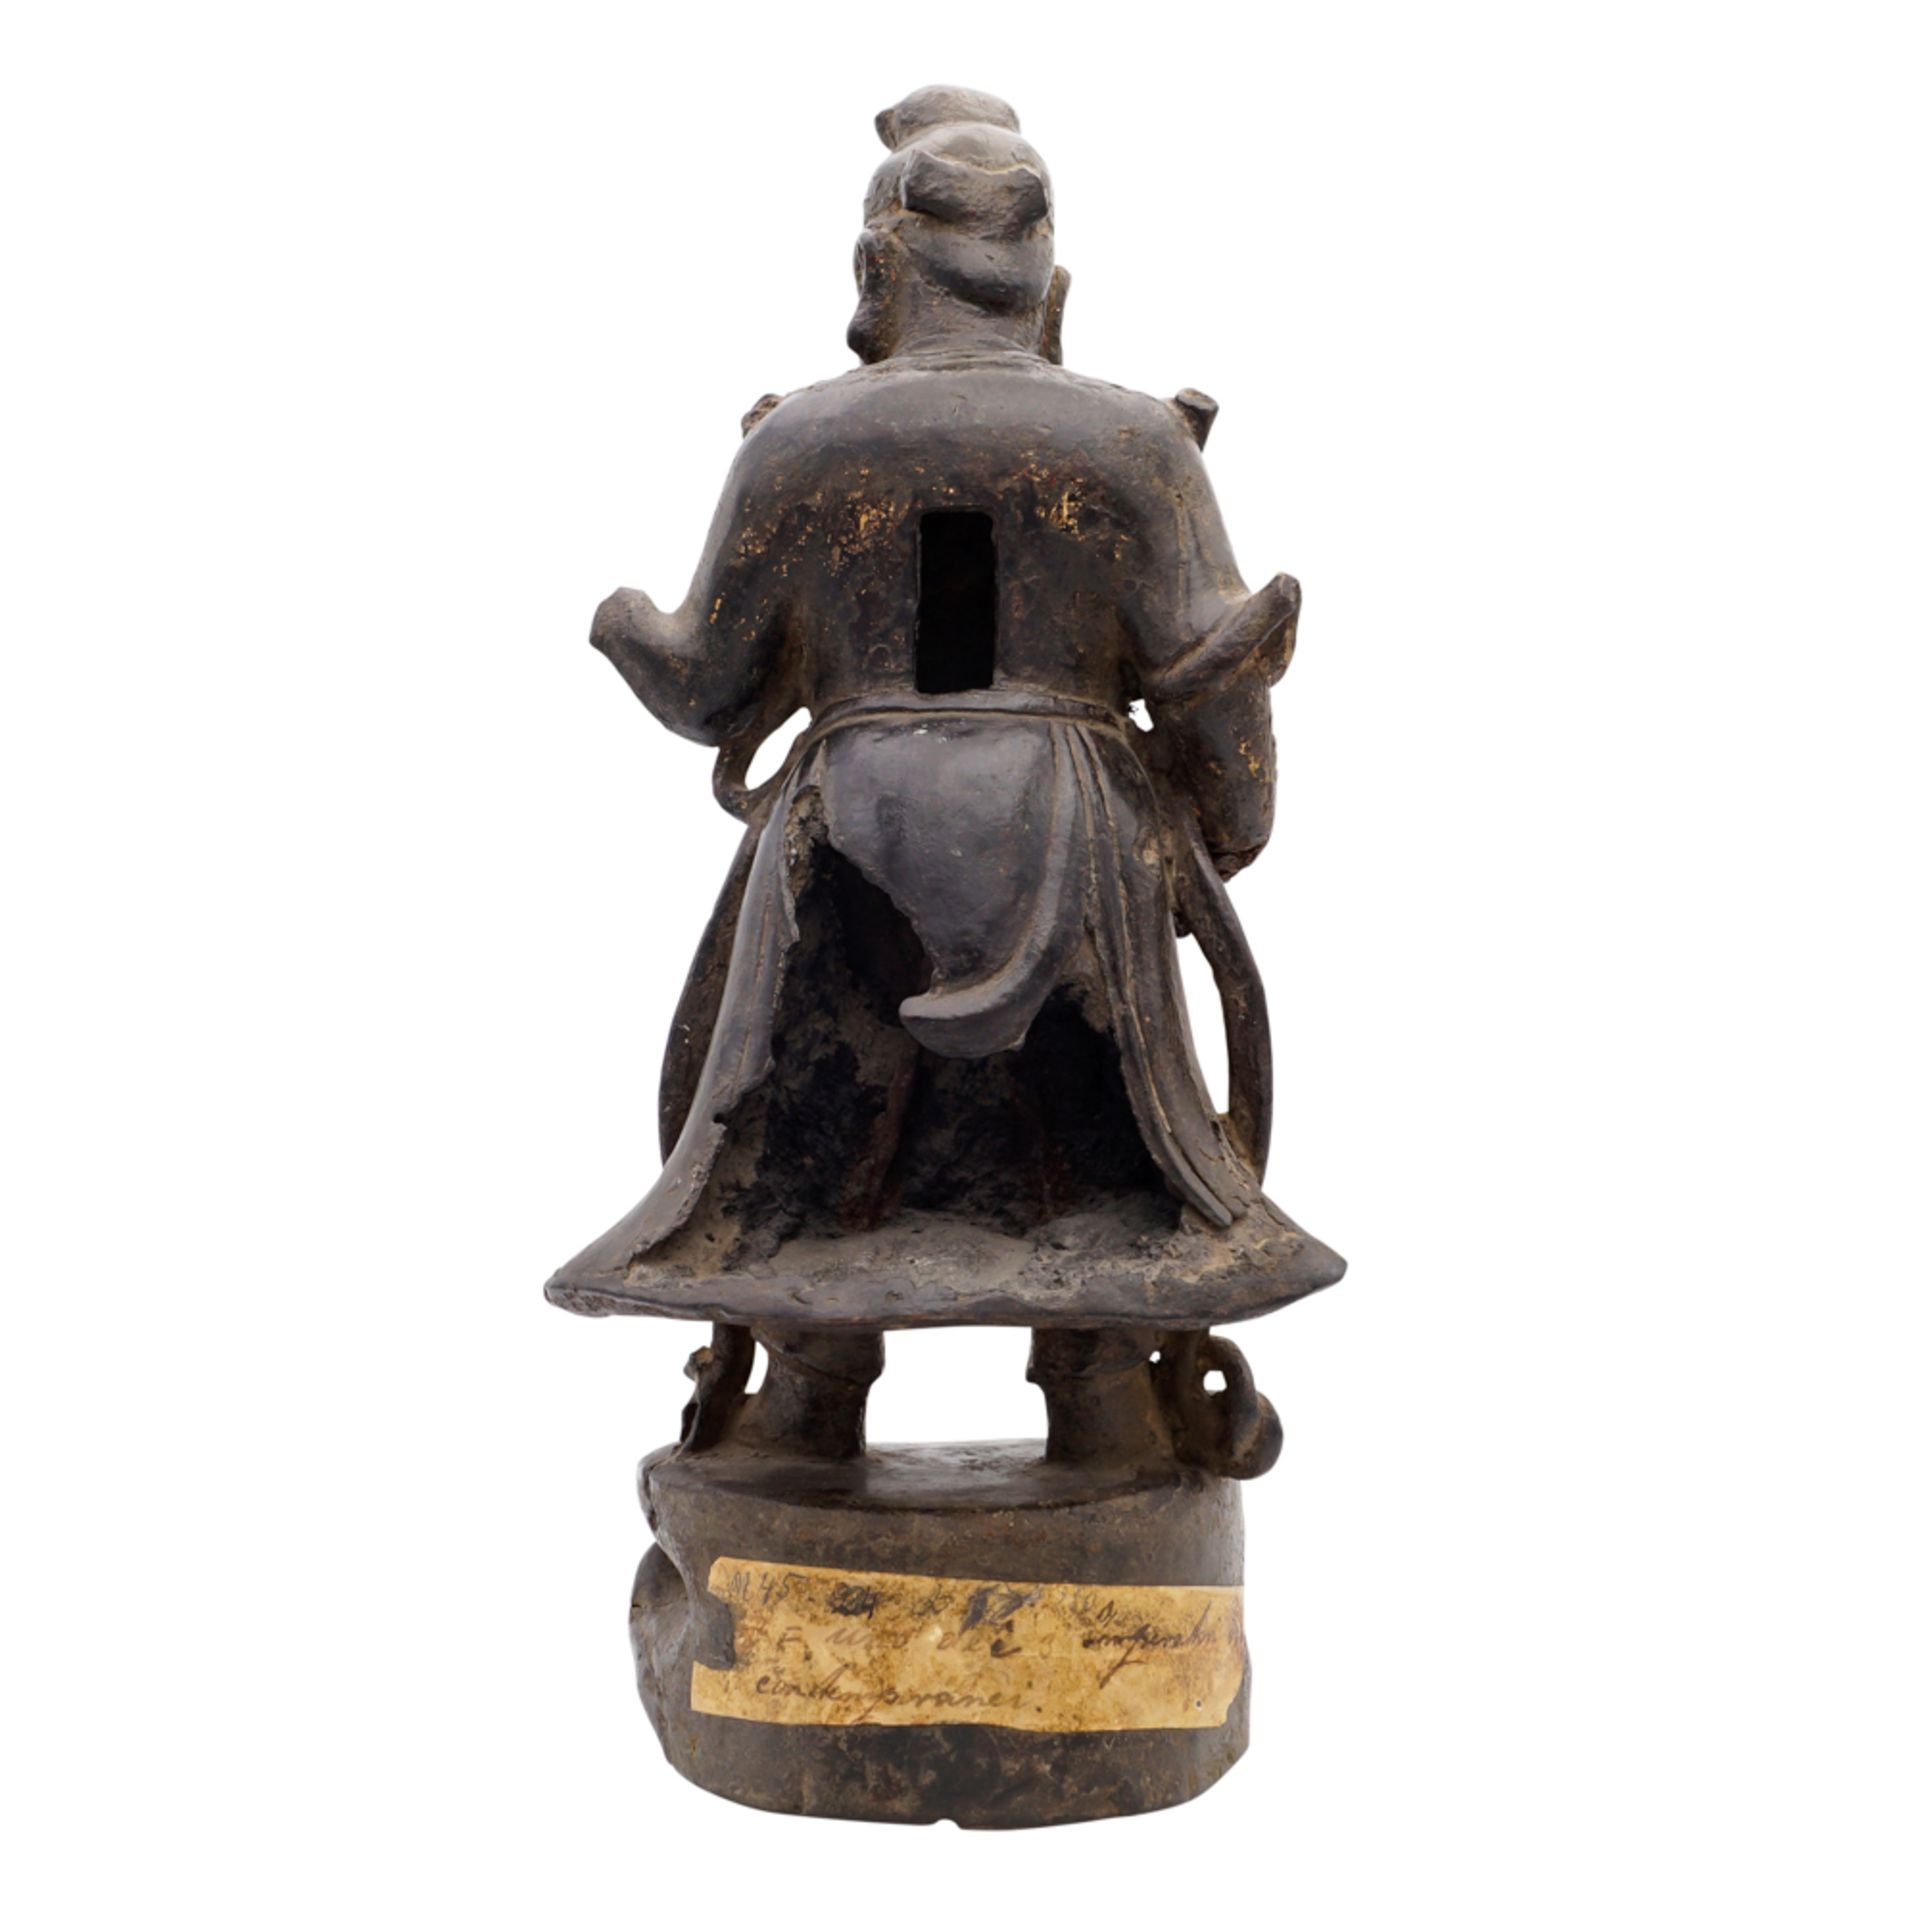 Burnished bronze sculpture China, Ming Dynasty, 17th Century h. 37 cm. - Image 2 of 2